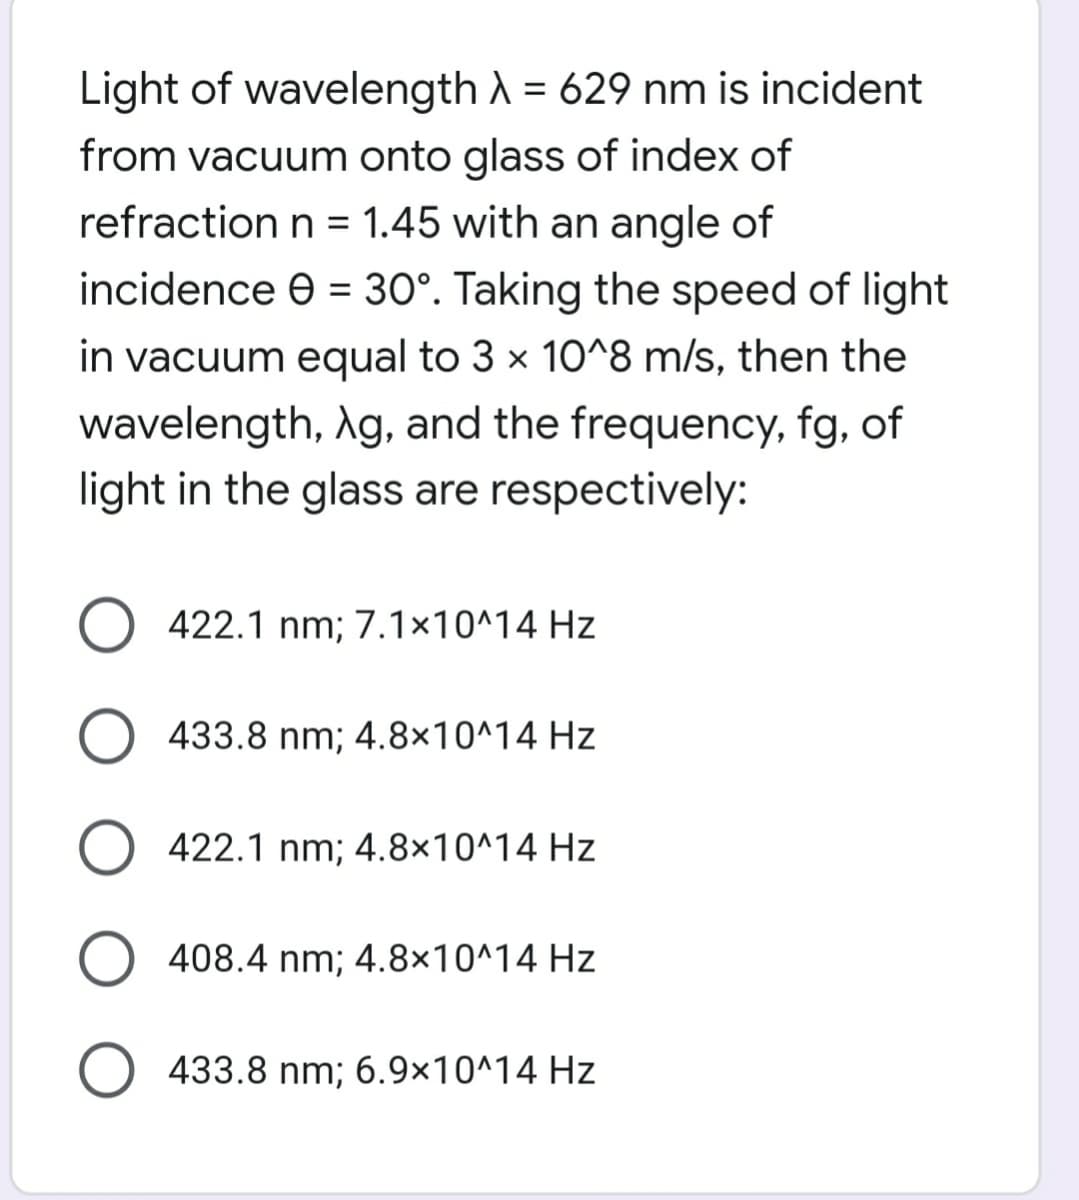 Light of wavelength A = 629 nm is incident
from vacuum onto glass of index of
refraction n = 1.45 with an angle of
incidence e = 30°. Taking the speed of light
in vacuum equal to 3 x 10^8 m/s, then the
wavelength, Ag, and the frequency, fg, of
light in the glass are respectively:
O 422.1 nm; 7.1×10^14 Hz
O 433.8 nm; 4.8×10^14 Hz
O 422.1 nm; 4.8×10^14 Hz
408.4 nm; 4.8×10^14 Hz
O 433.8 nm; 6.9×10^14 Hz
